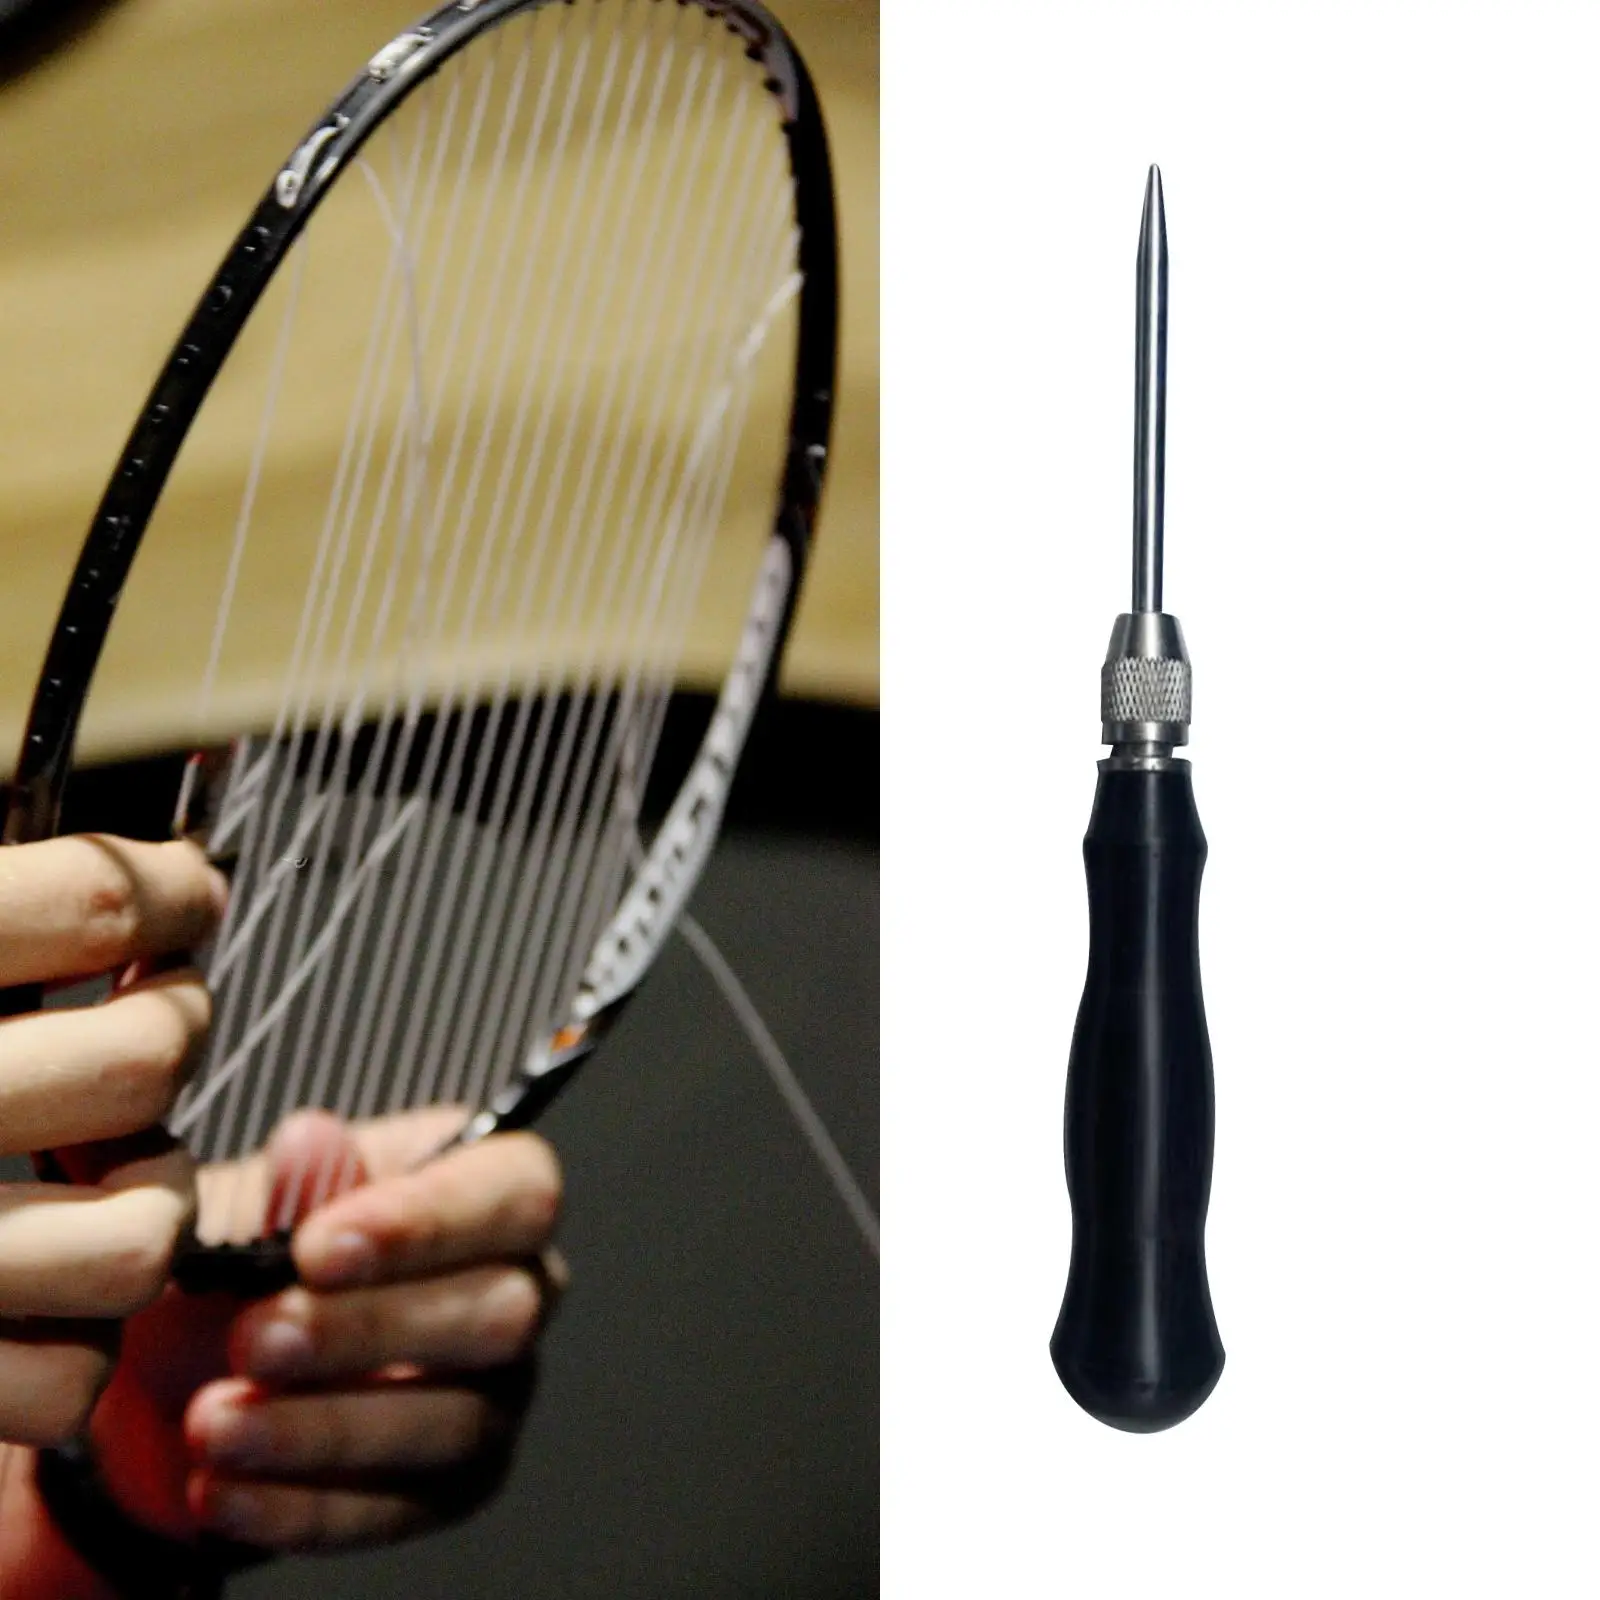 Sports Tennis Stringing Machine Tools Racket String Assistance Straight Awl for Tennis Badminton Squash Racquet